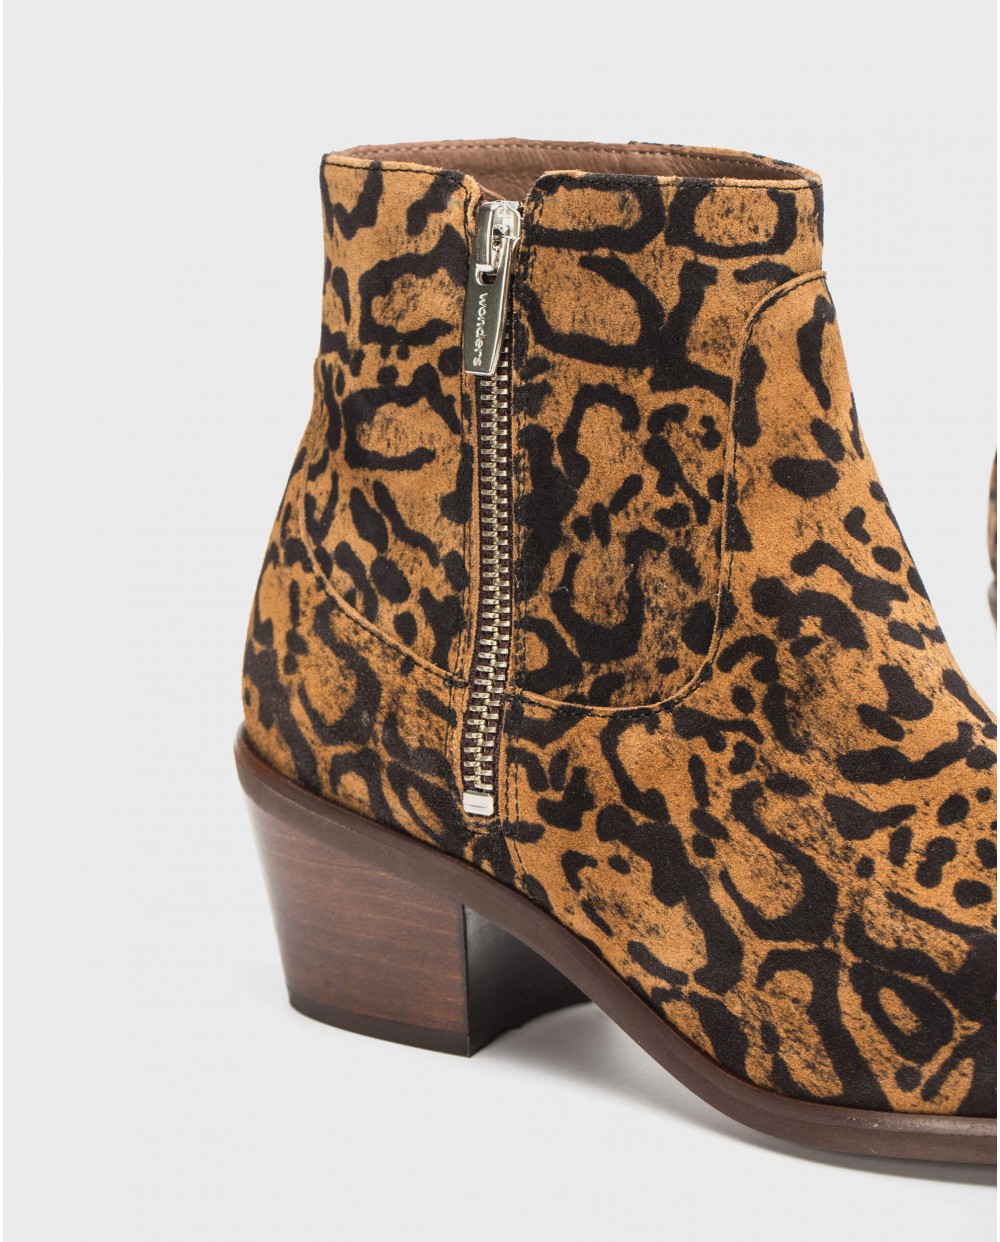 Wonders-Ankle Boots-Cowboy print ankle boot